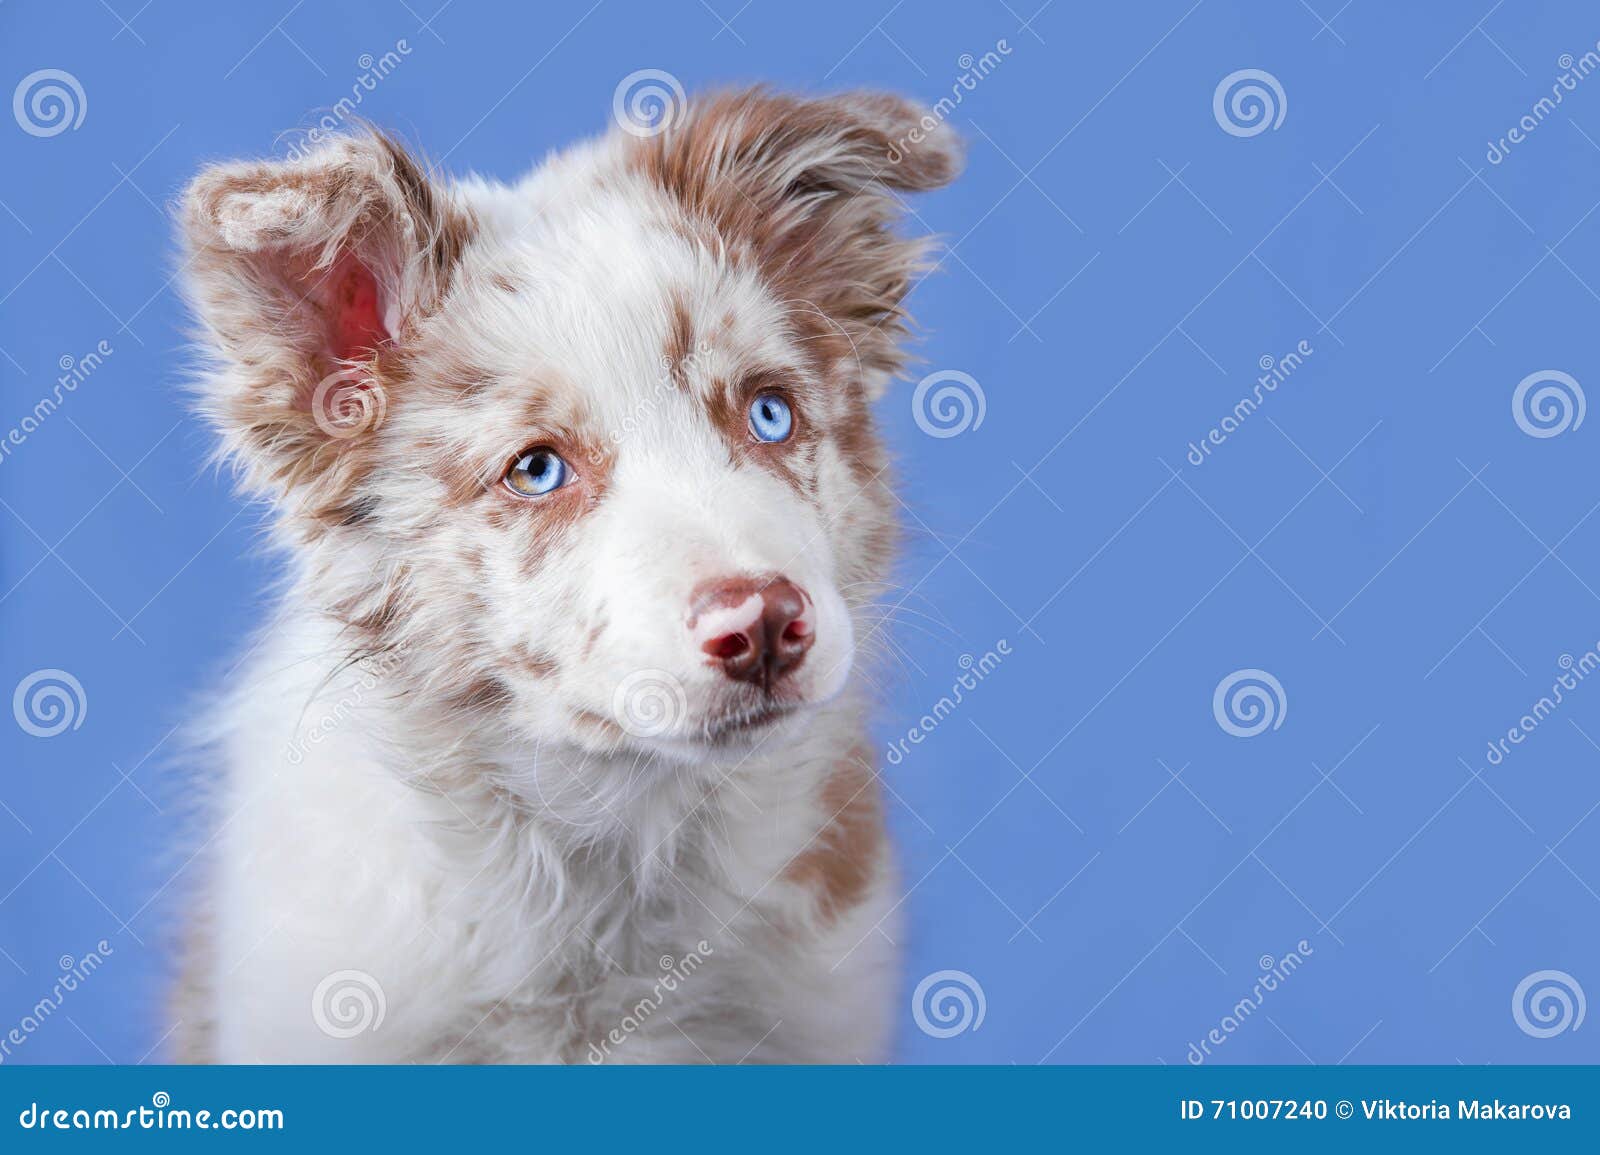 Red Merle Collie Puppy on the Blue Background Stock Photo - Image of animals, eyed: 71007240